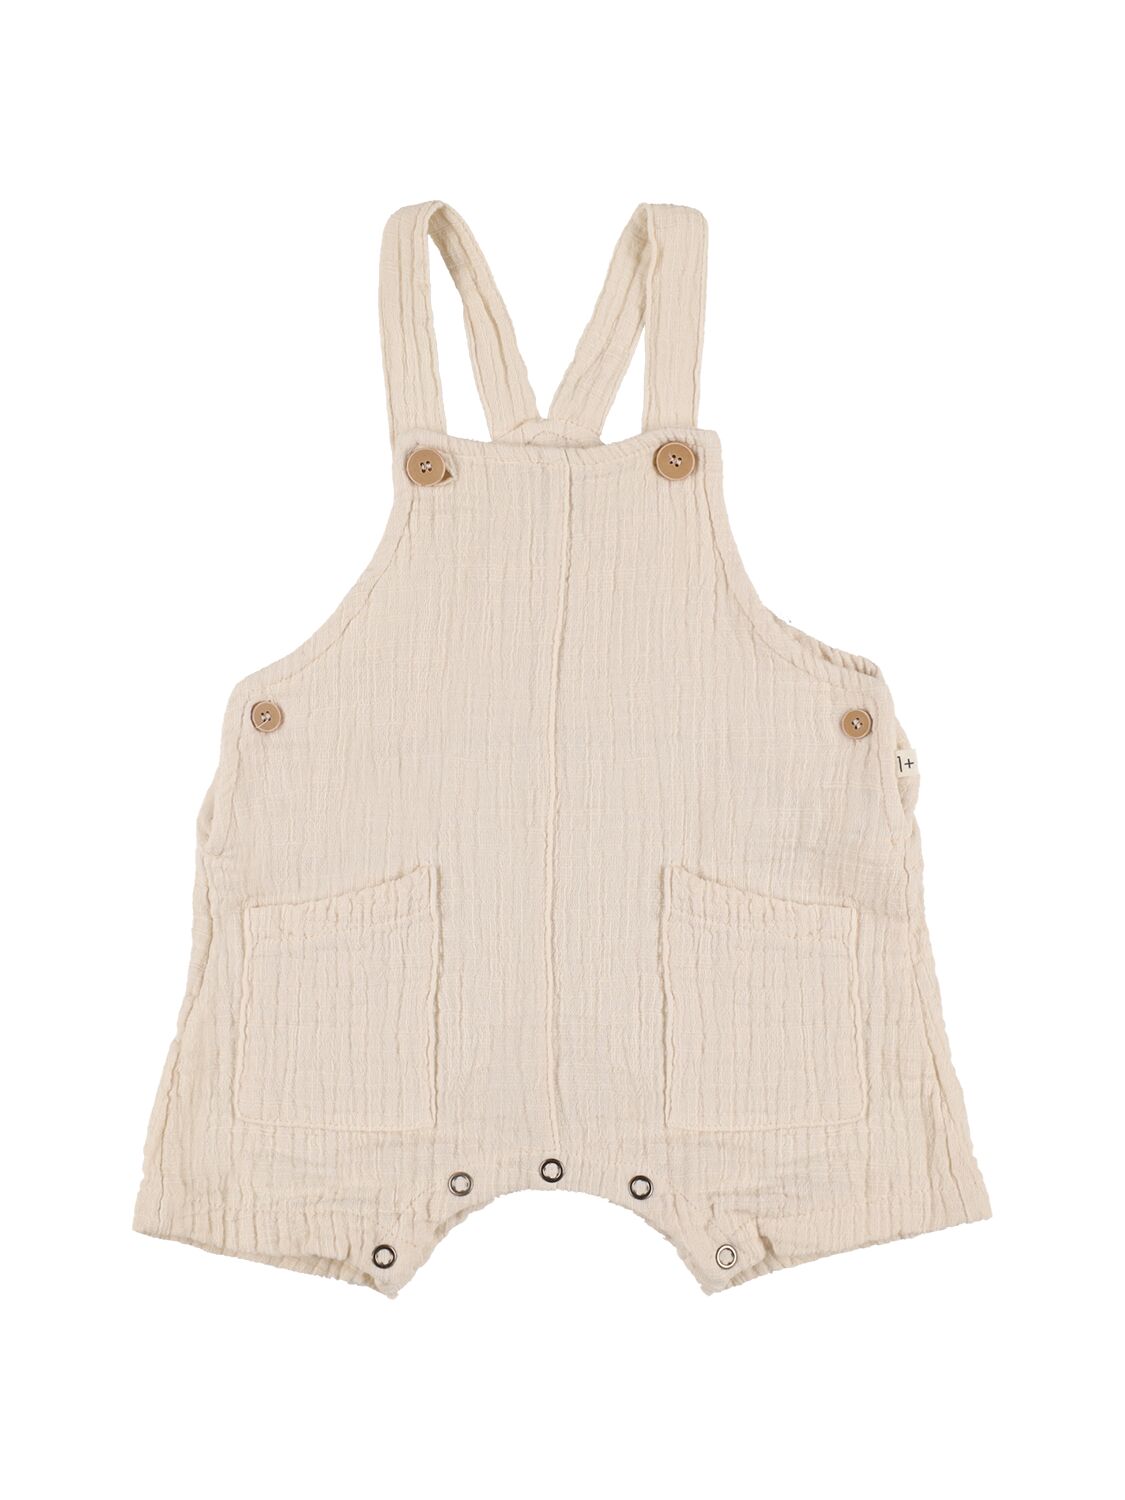 Image of Cotton Overalls